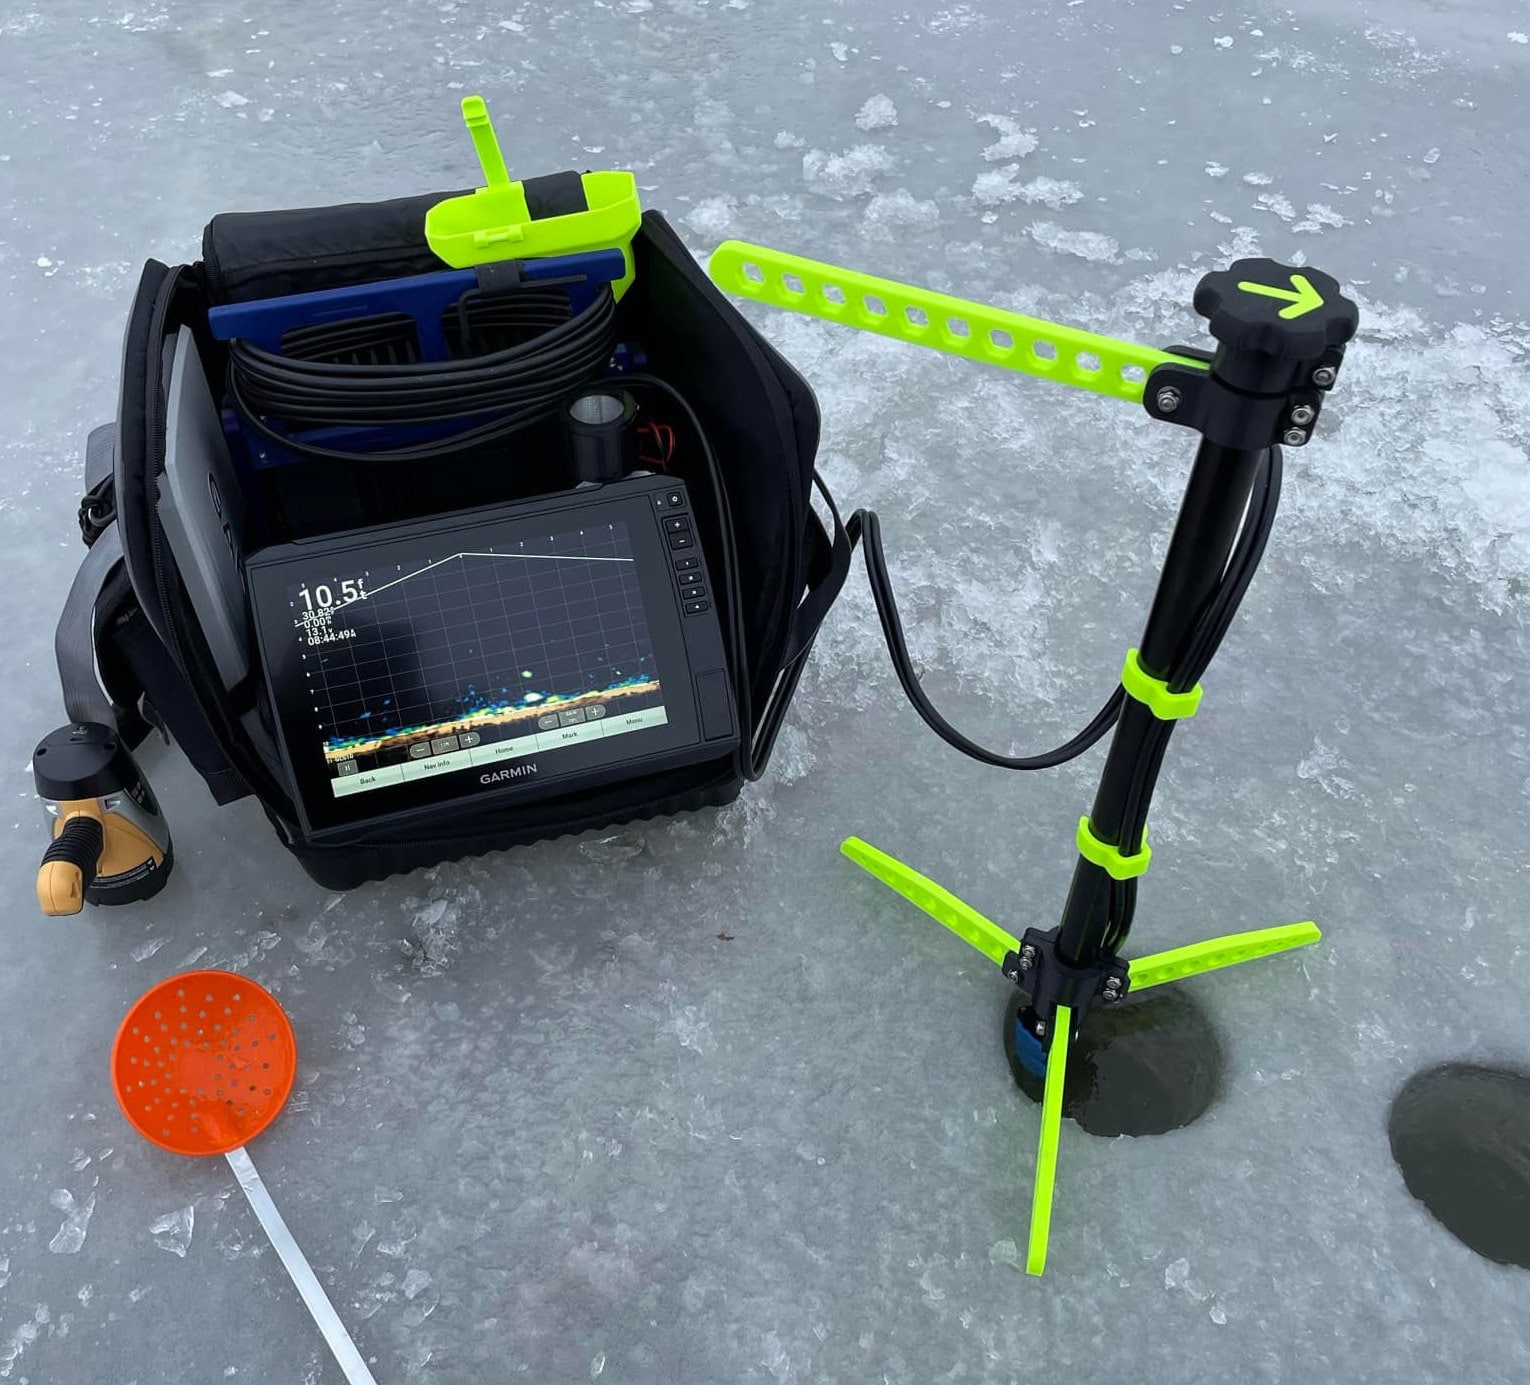 Transducer Pole System Our ice-ducer Model for the Garmin LVS34